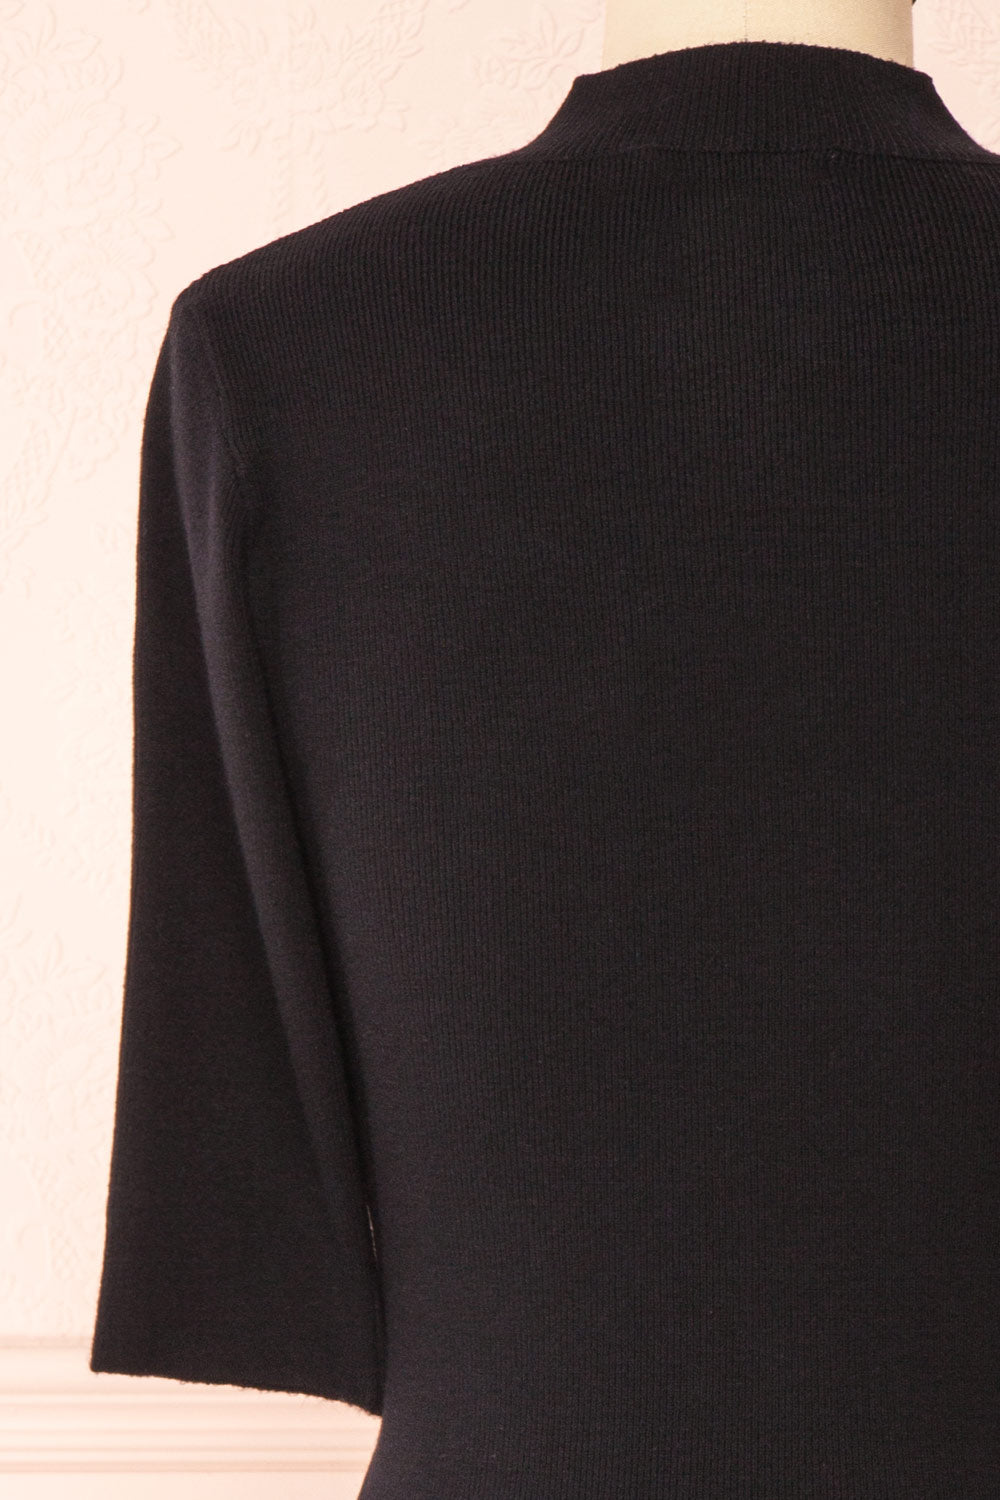 Nalleli Black Fitted Mock Top w/ Half Sleeves | Boutique 1861 back close-up